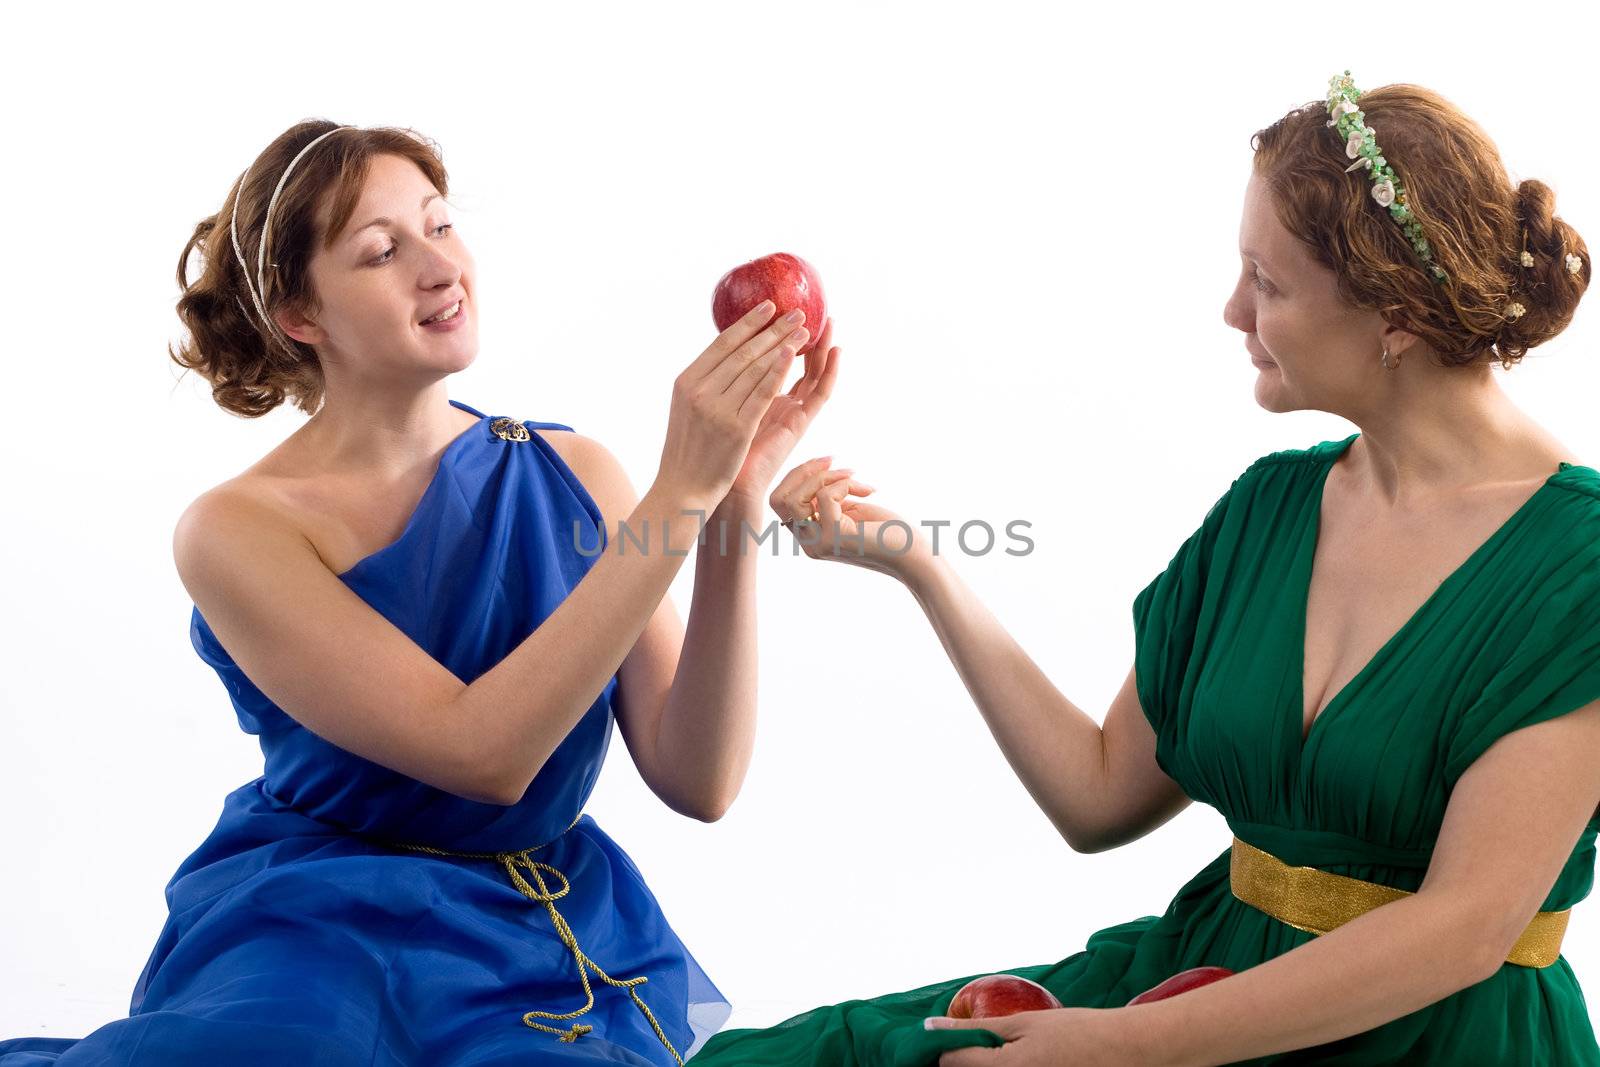 Two ladies in antique dress and apples on white background
